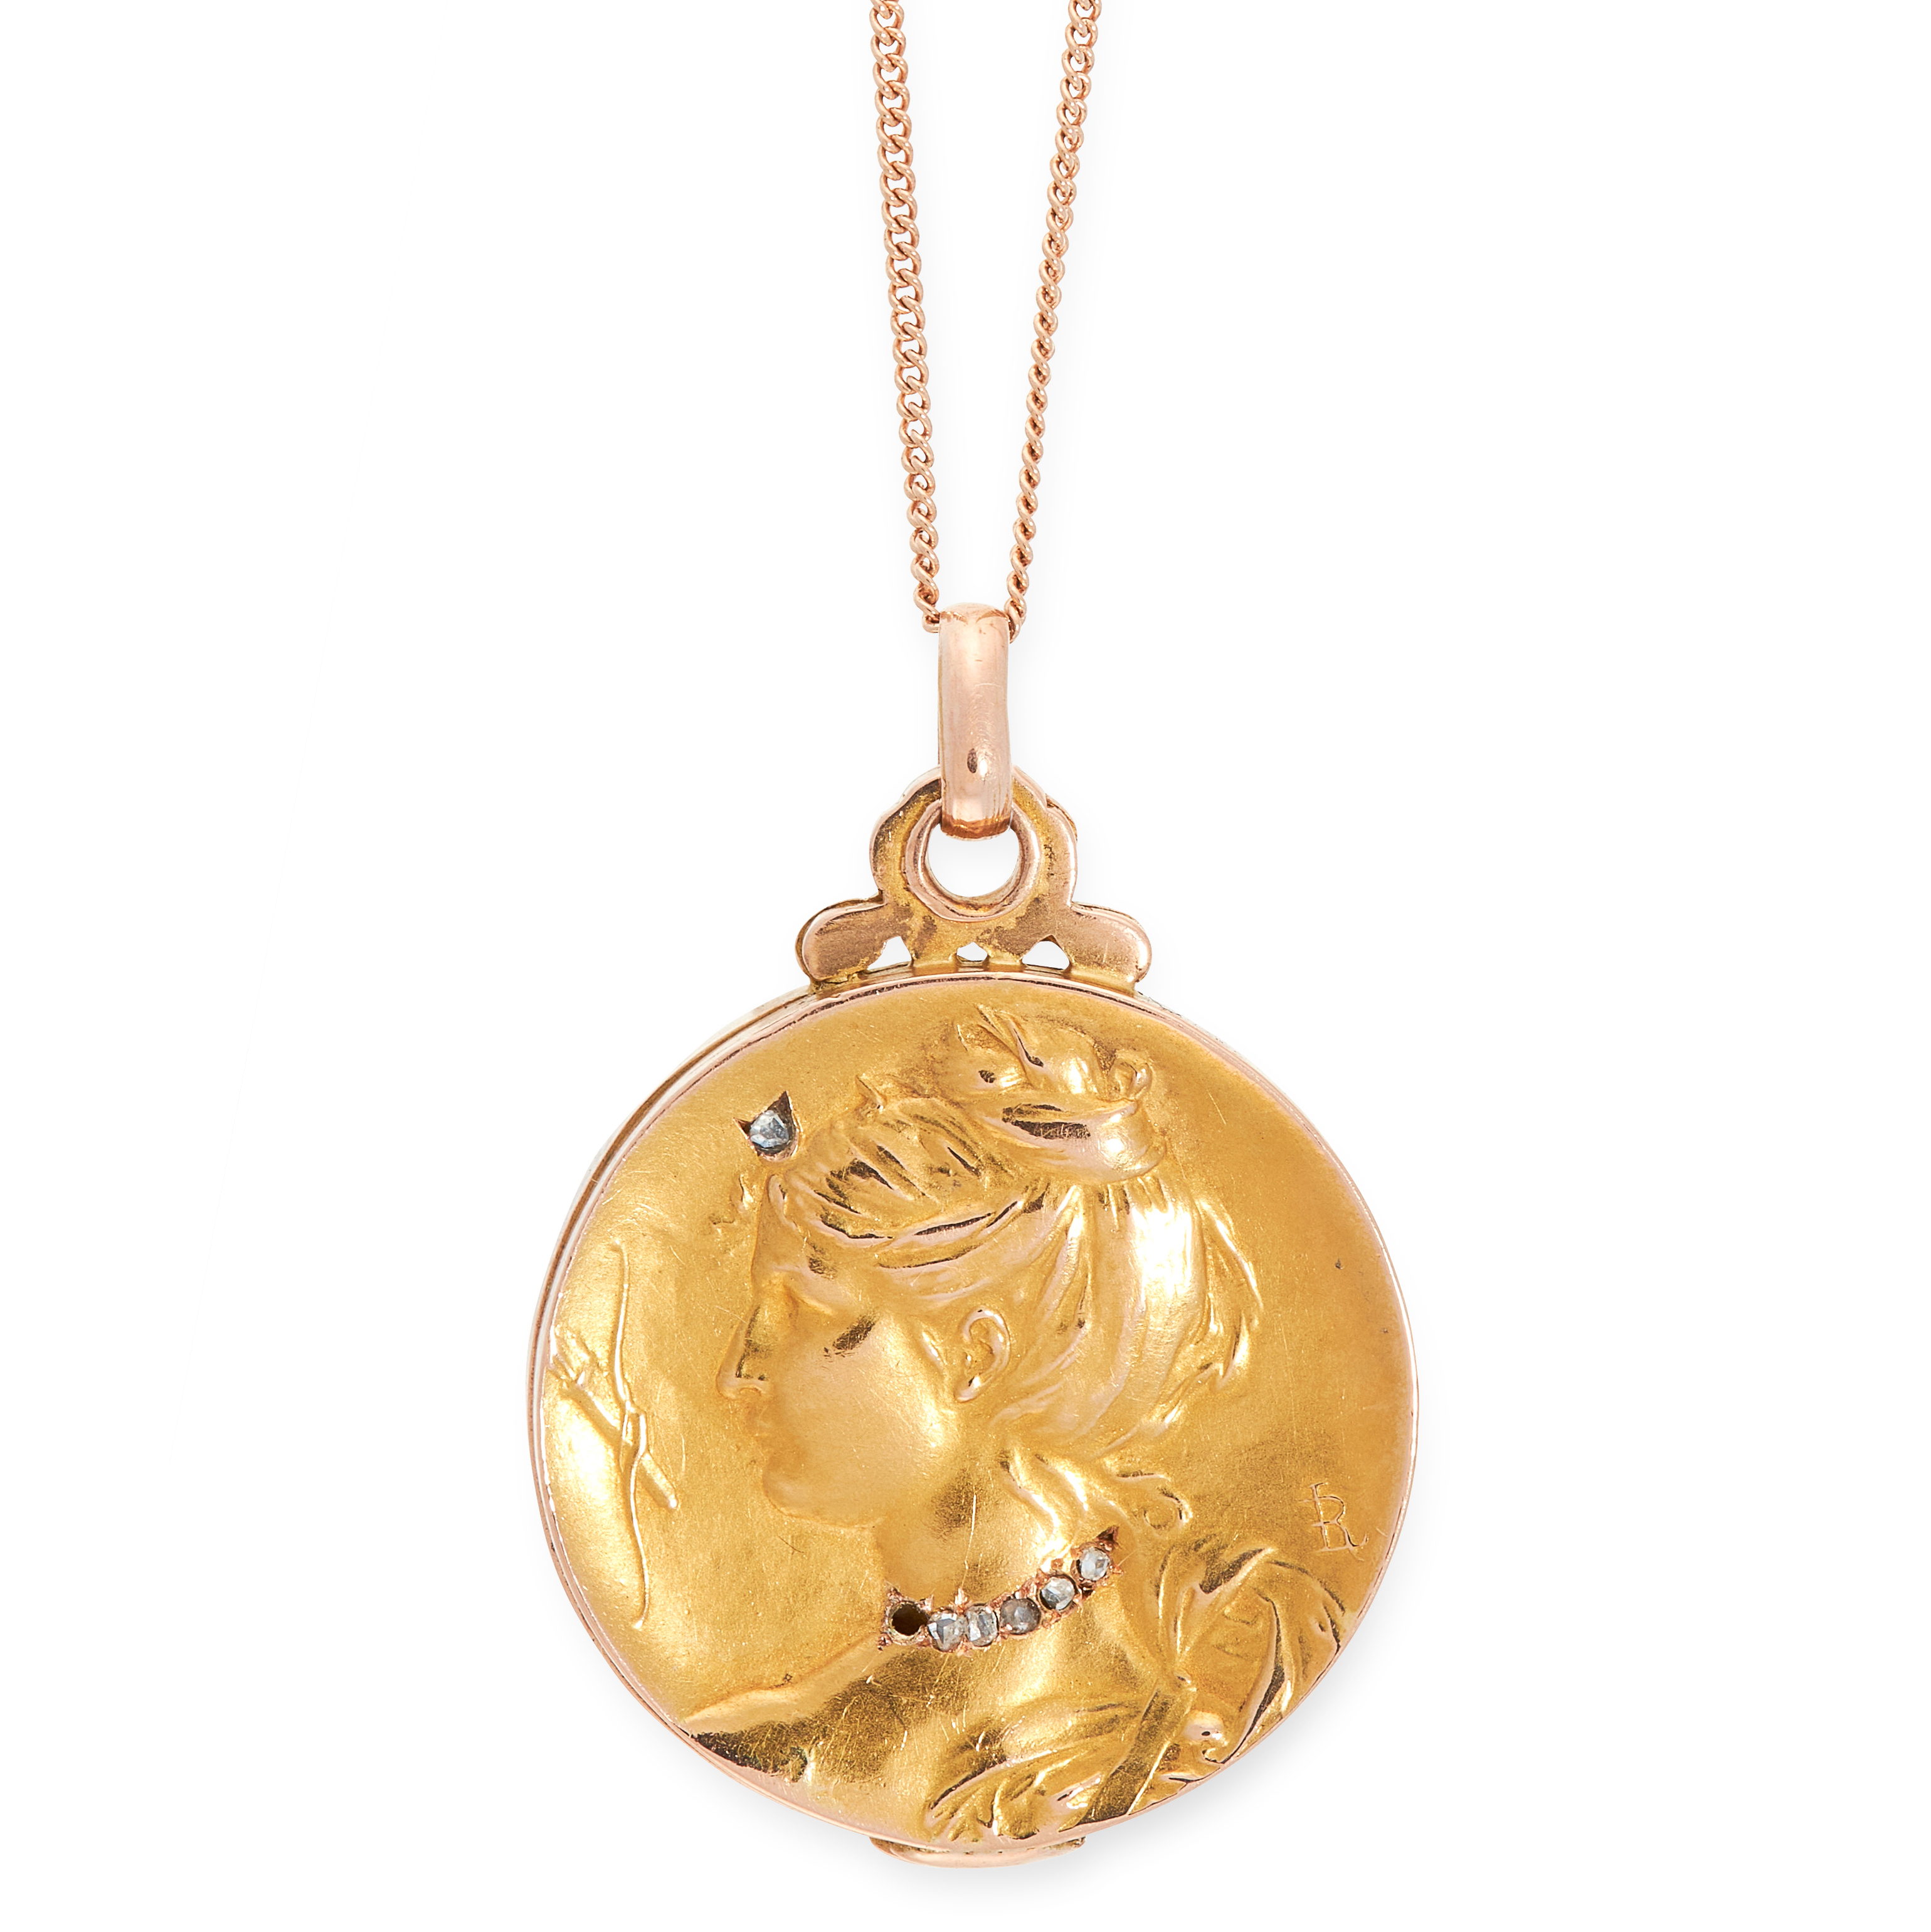 AN ANTIQUE DIAMOND MOURNING LOCKET PENDANT AND CHAIN in high carat yellow gold, the face chased to